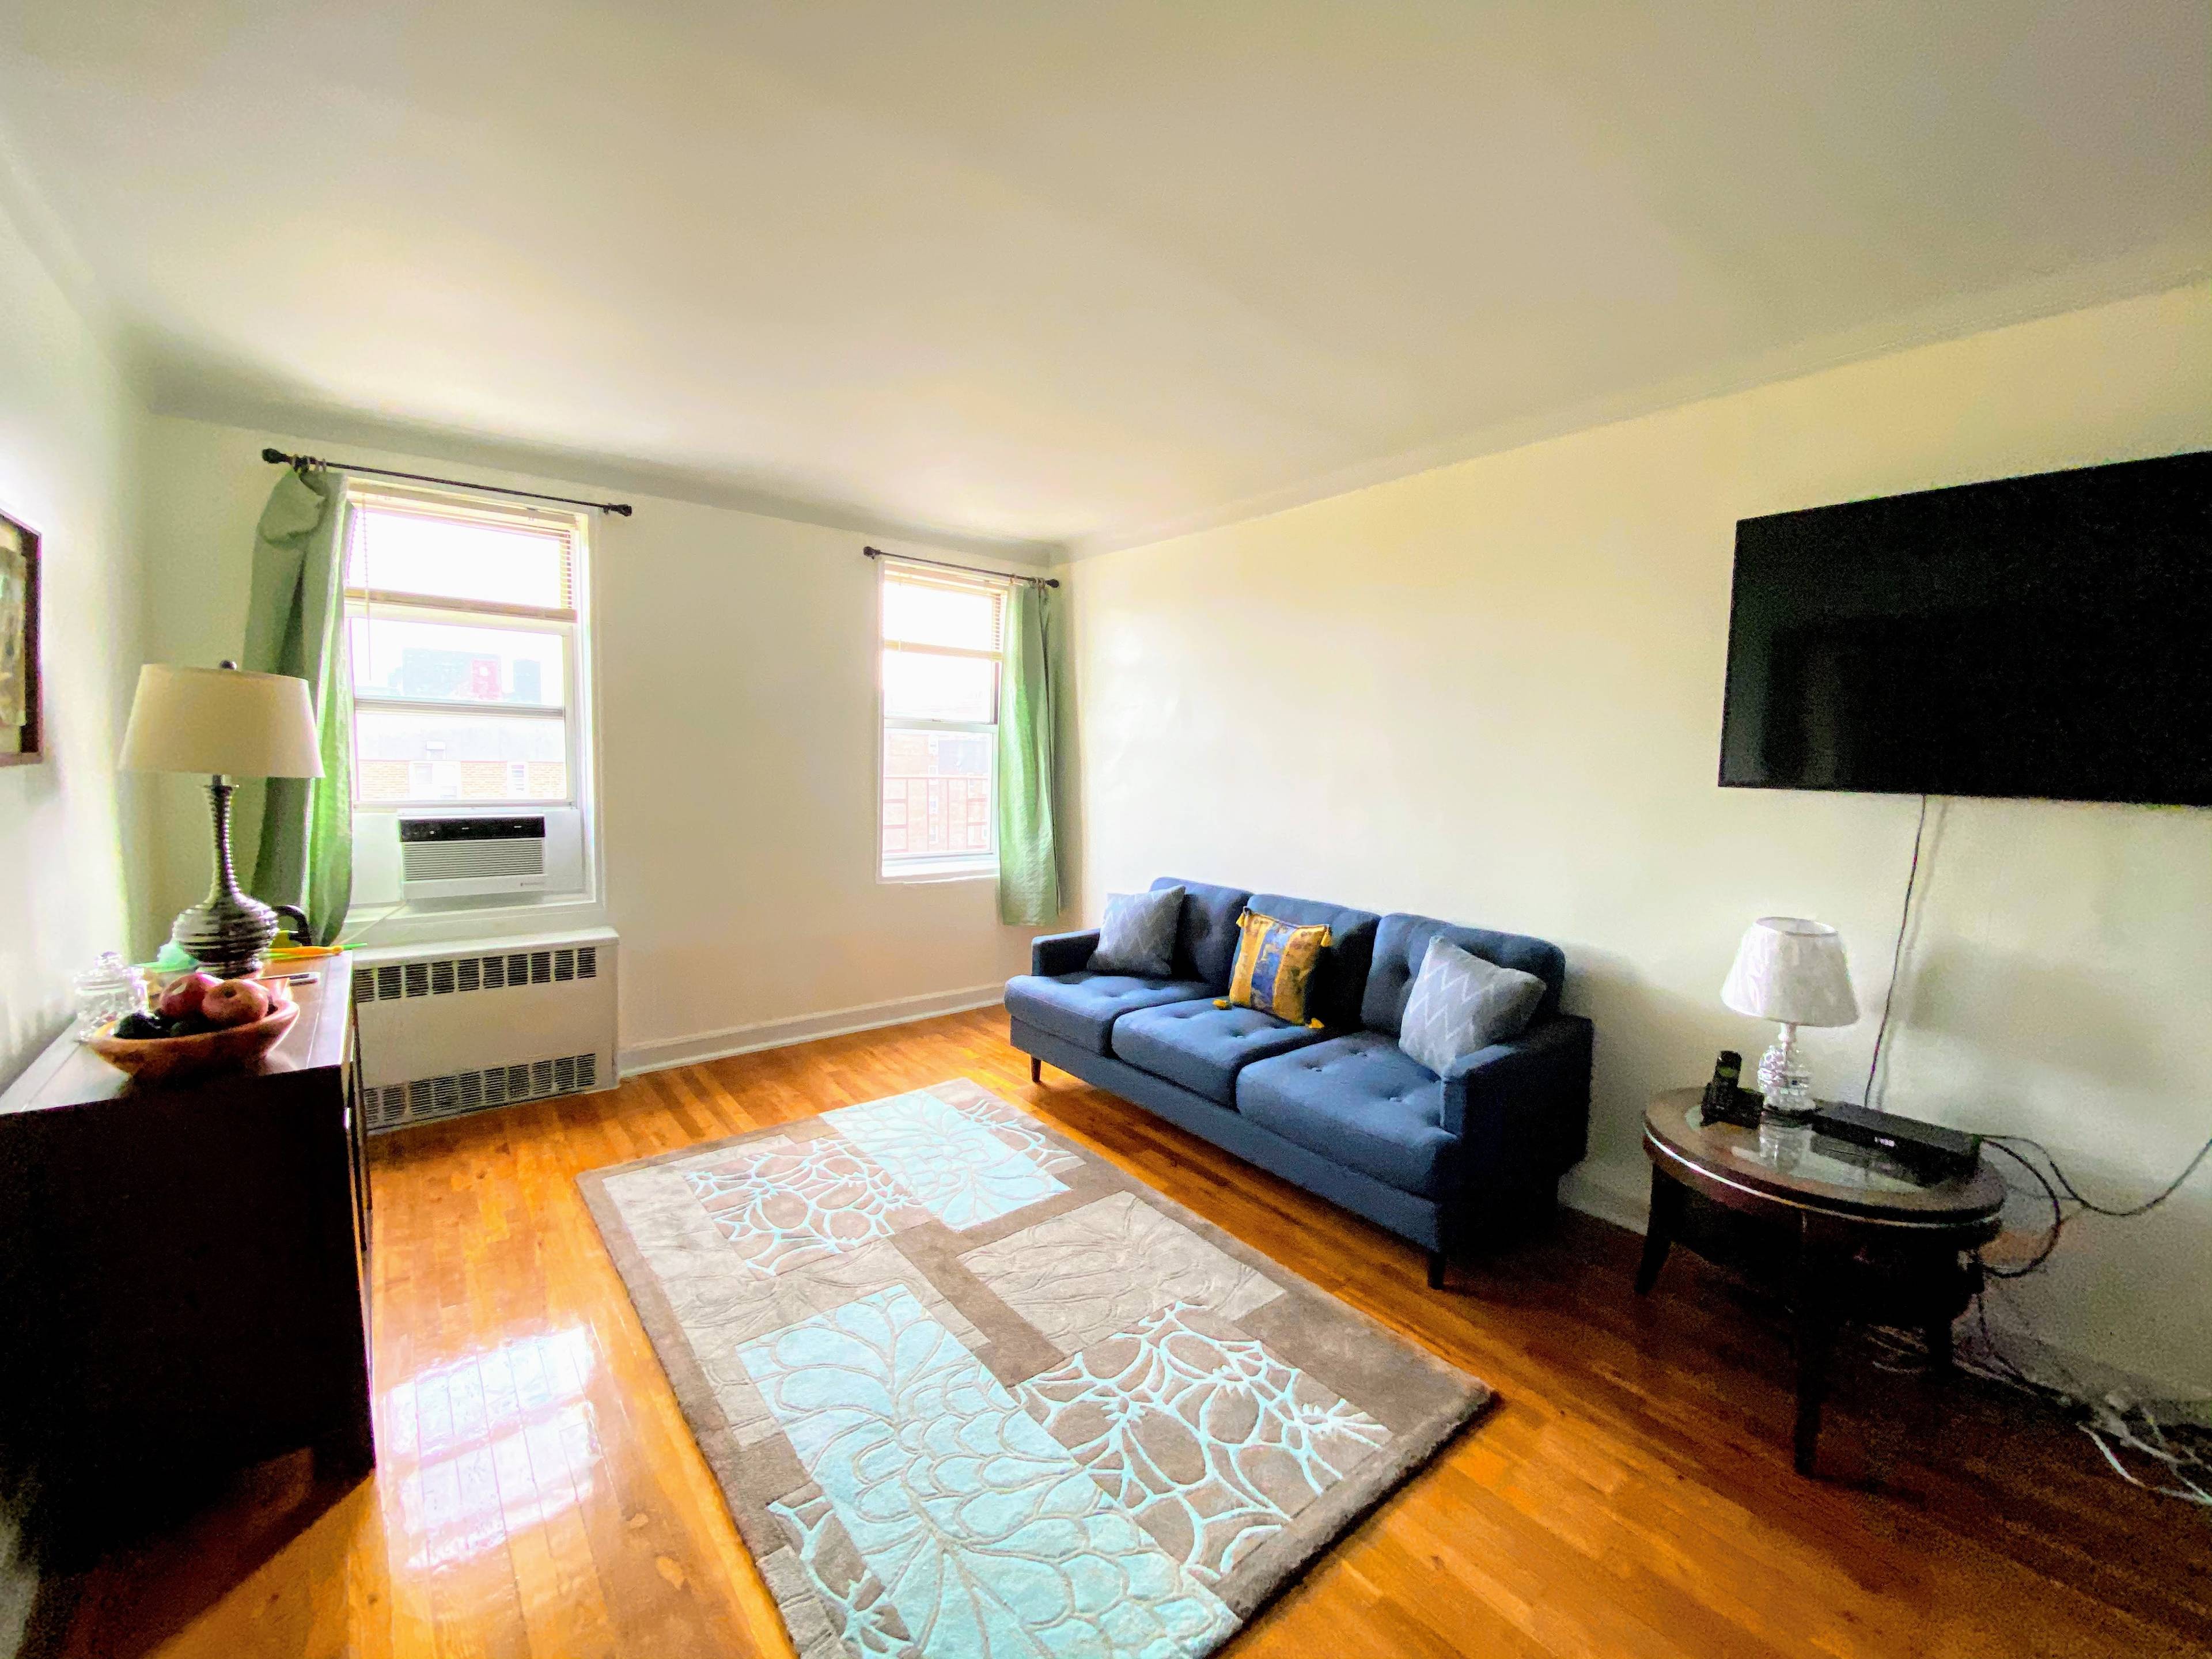 Welcome to Colorado. Beautiful 2 bed 2bath co op unit located in the heart of Forest Hills.